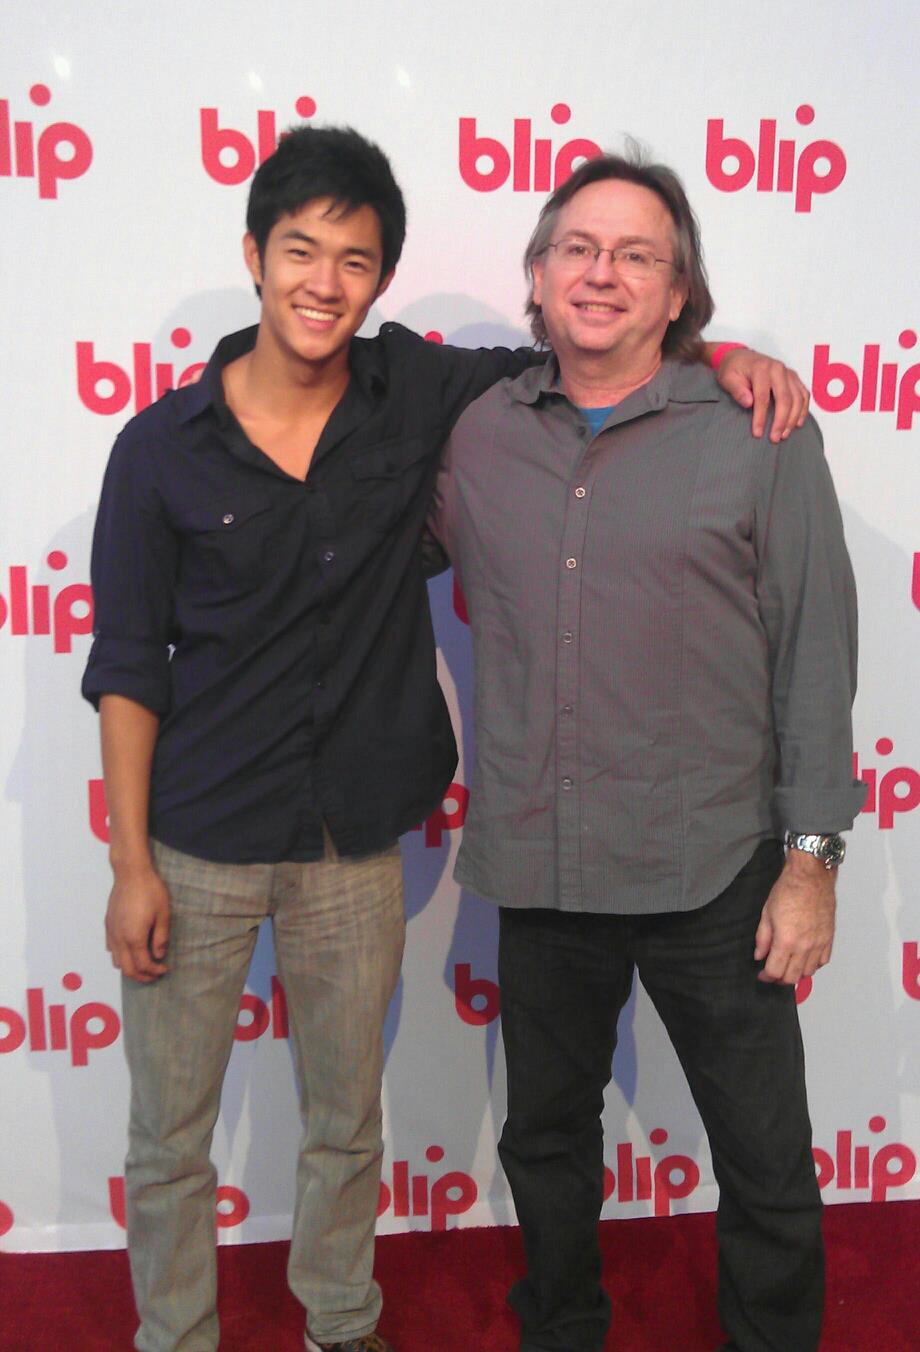 Blip VidCon with manager Steven G. Lowe